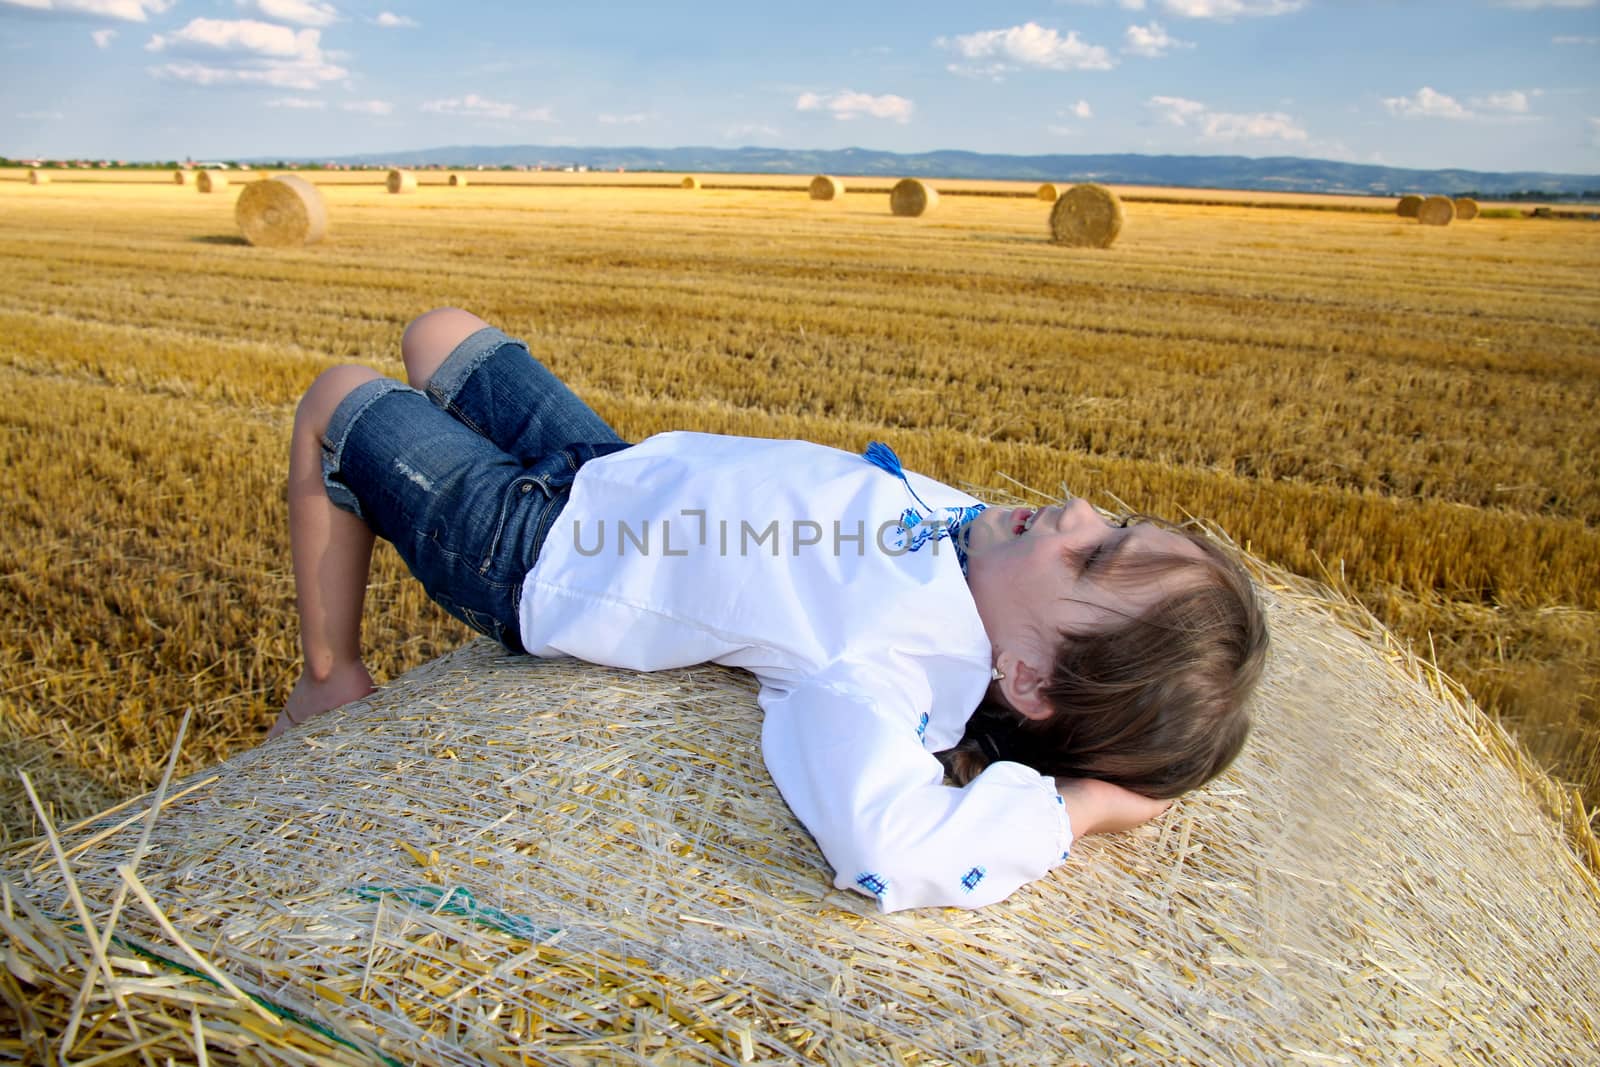 small rural girl on the straw after harvest field with straw bales